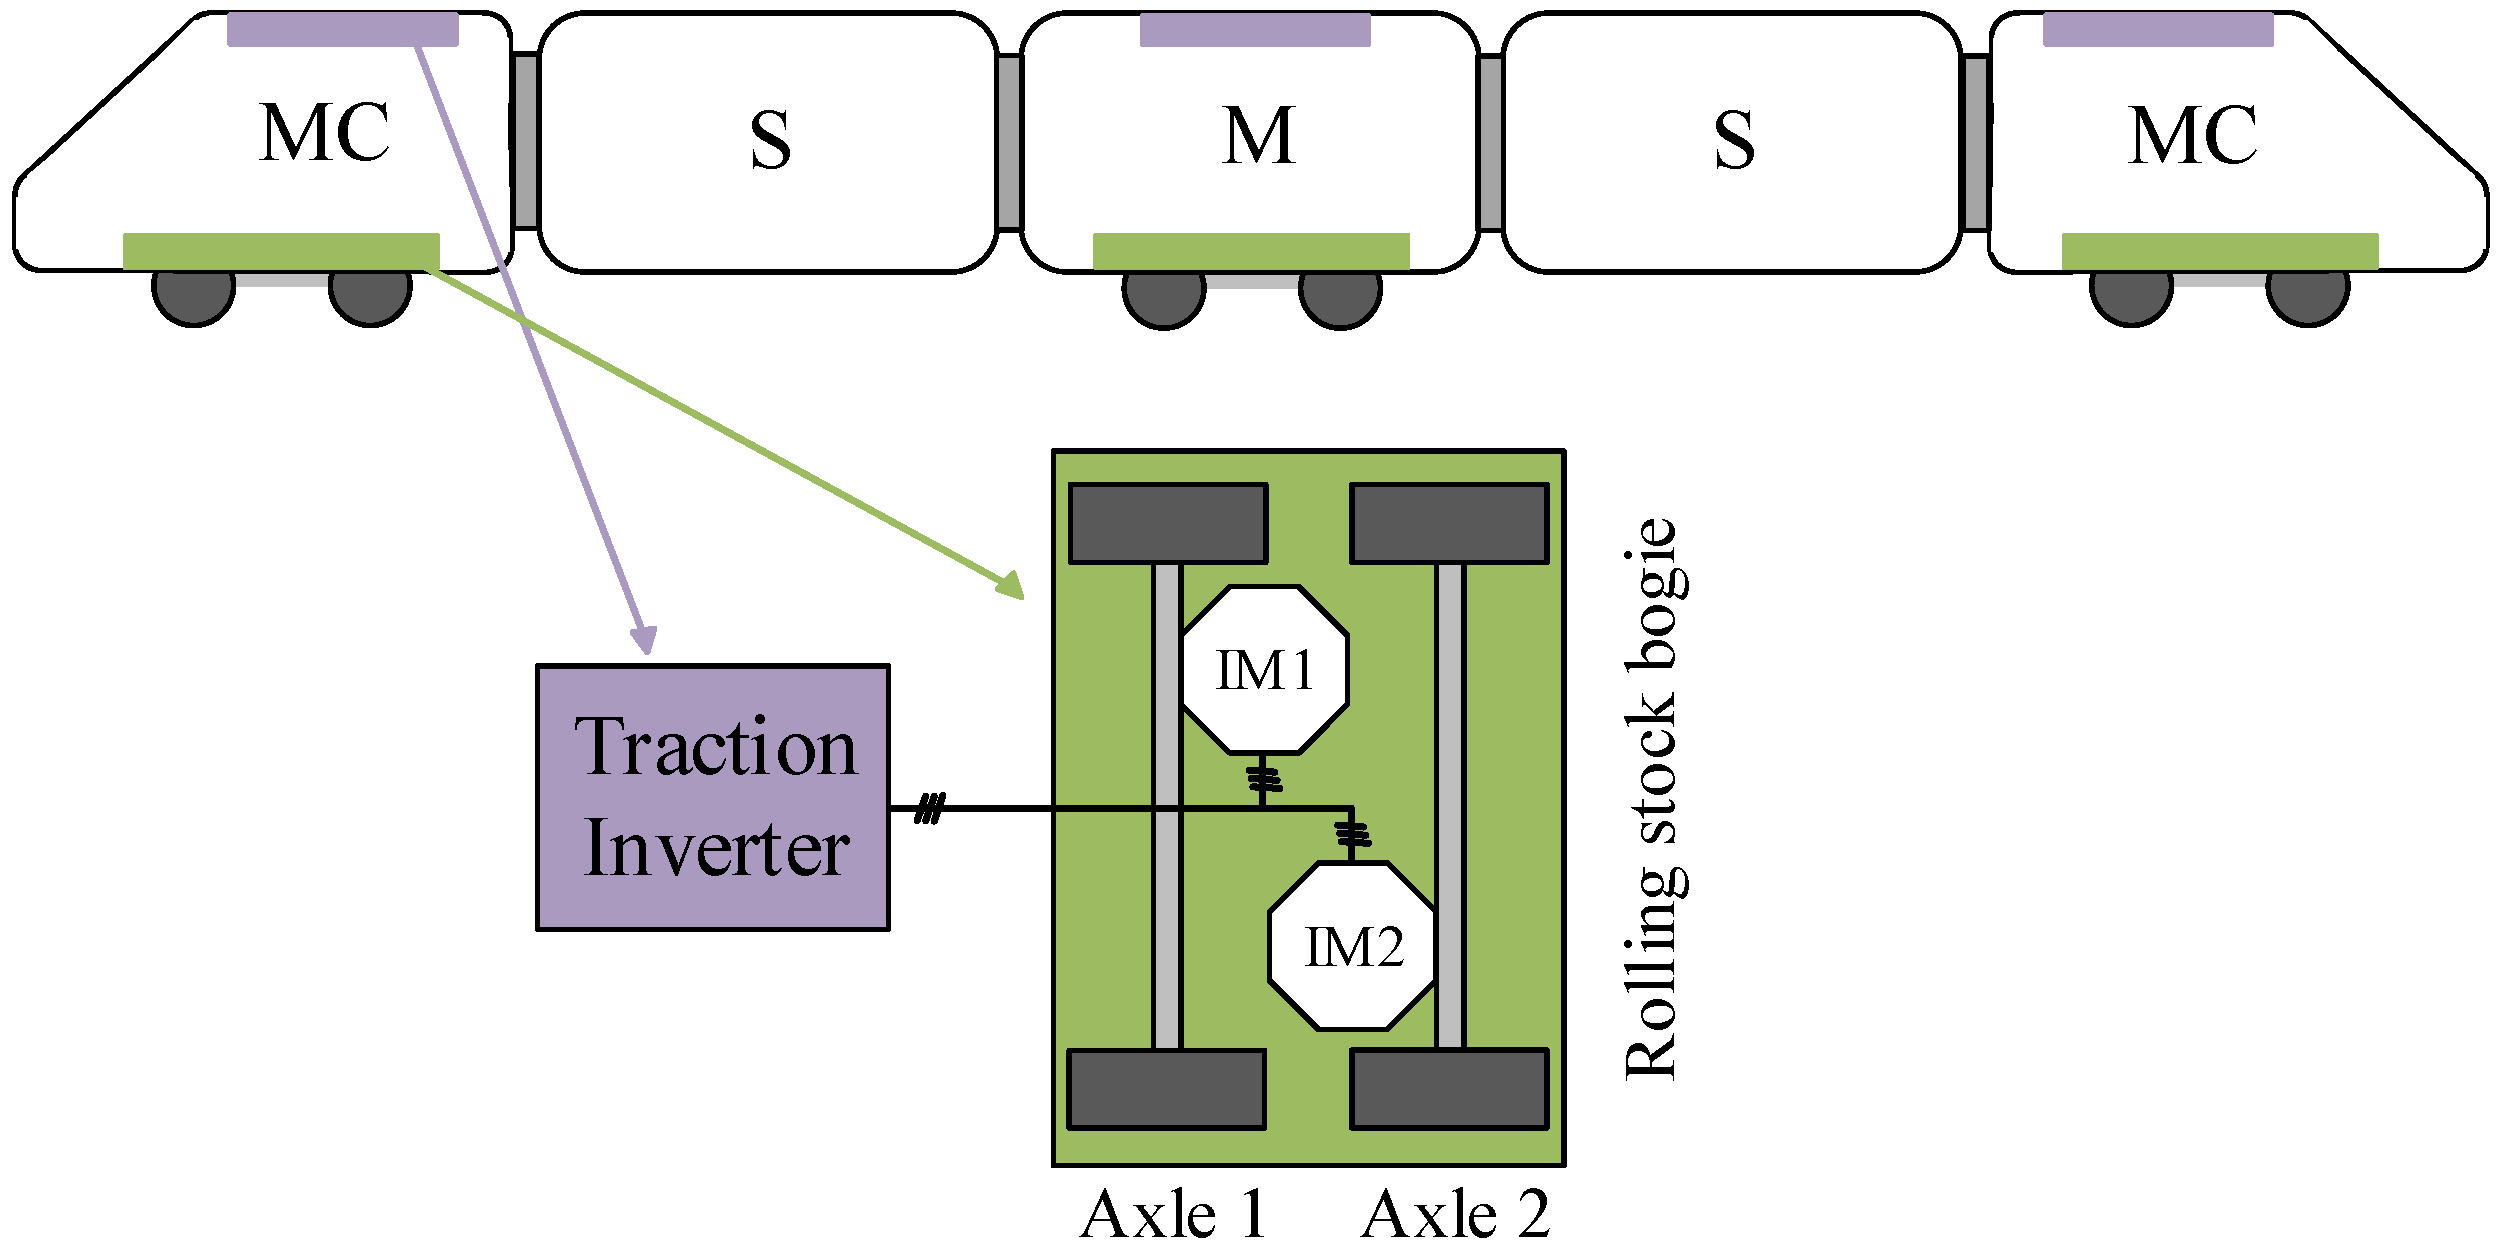 Figure 1: g1shs students’ schema of ‘Farmhand’ (adapted from Khodadady. A Machine Learning-based approach for Fault Detection of Railway track and its components. A Machine Learning-based approach for Fault Detection of Railway track and its components article. Powered связь